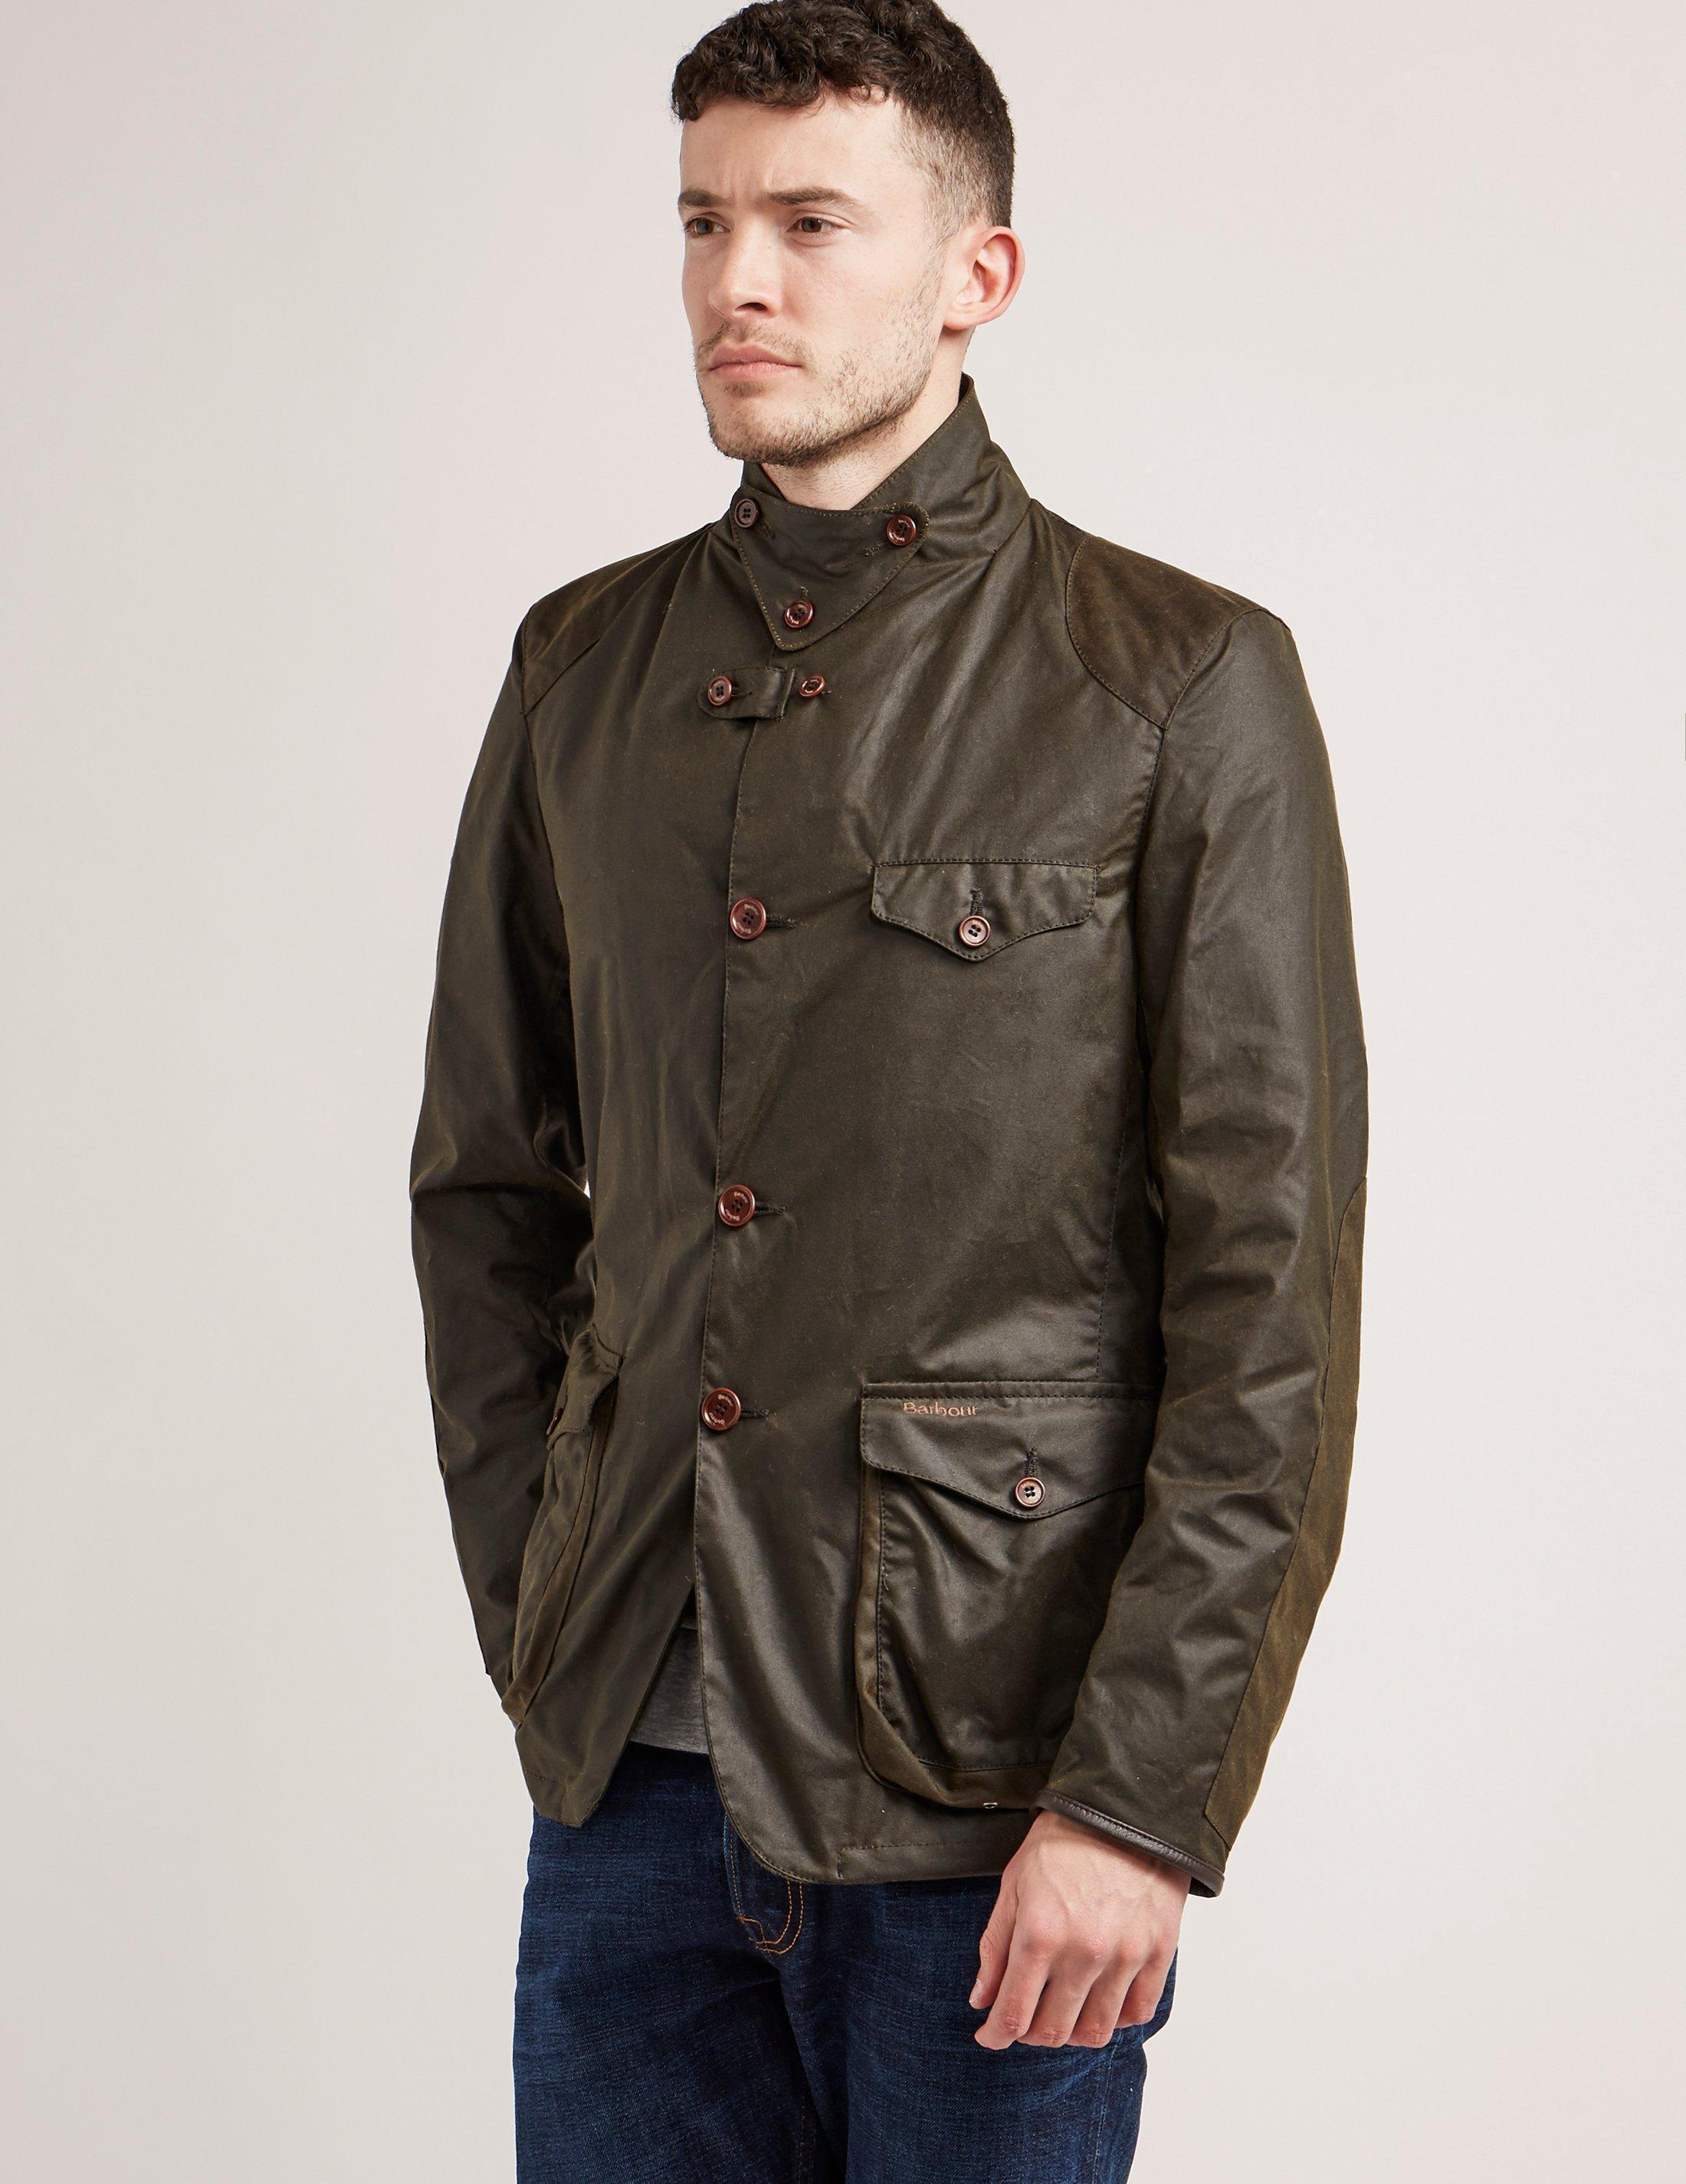 Barbour Cotton Beacon Sports Wax Jacket in Olive (Green) for Men - Lyst